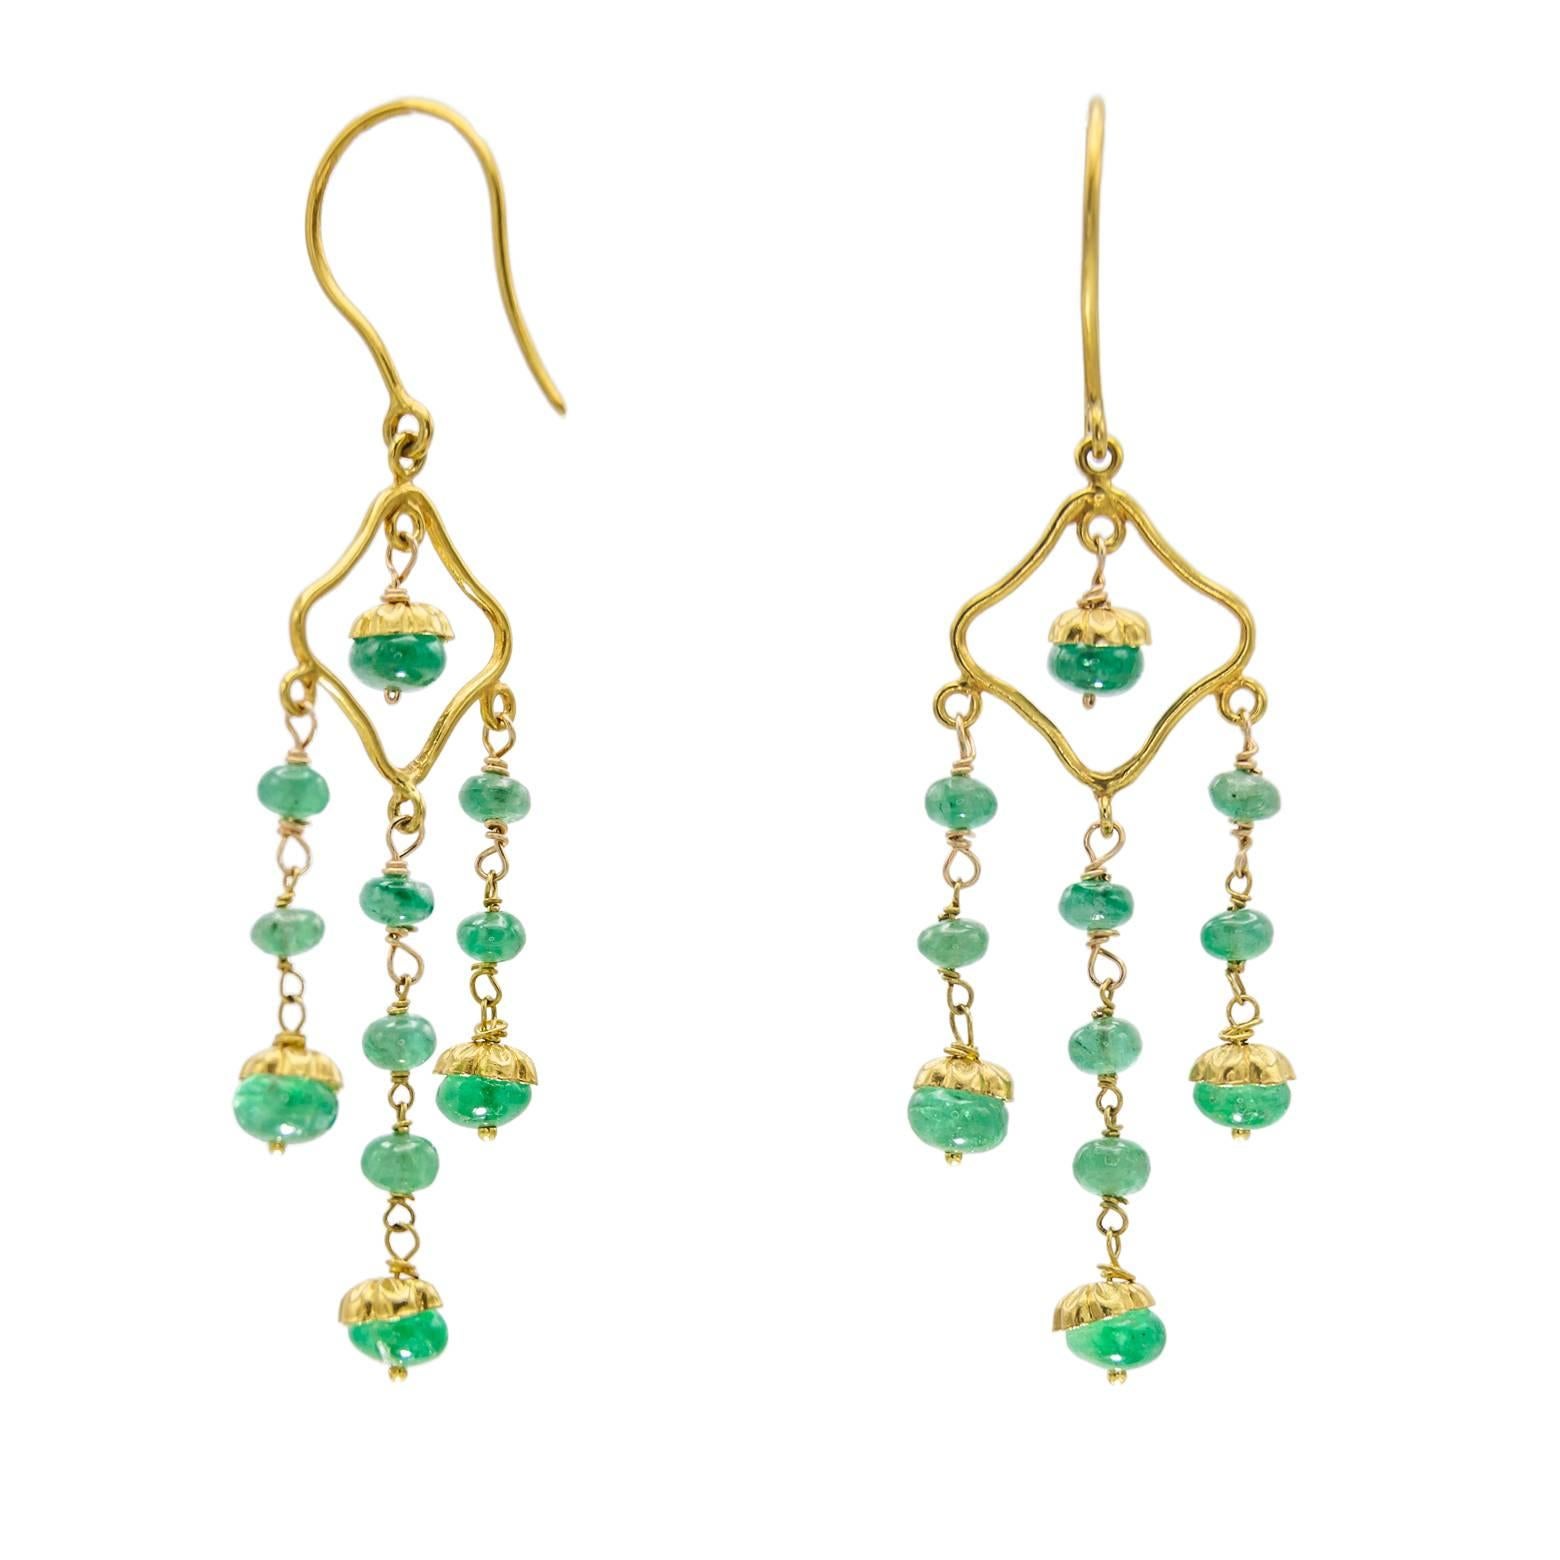 These earrings are light and airy. The emeralds are accented in a beautiful balance of gold and deep green. They are very popular now in the style of 'Bohemian'. These are the perfect balance of city meets beach.